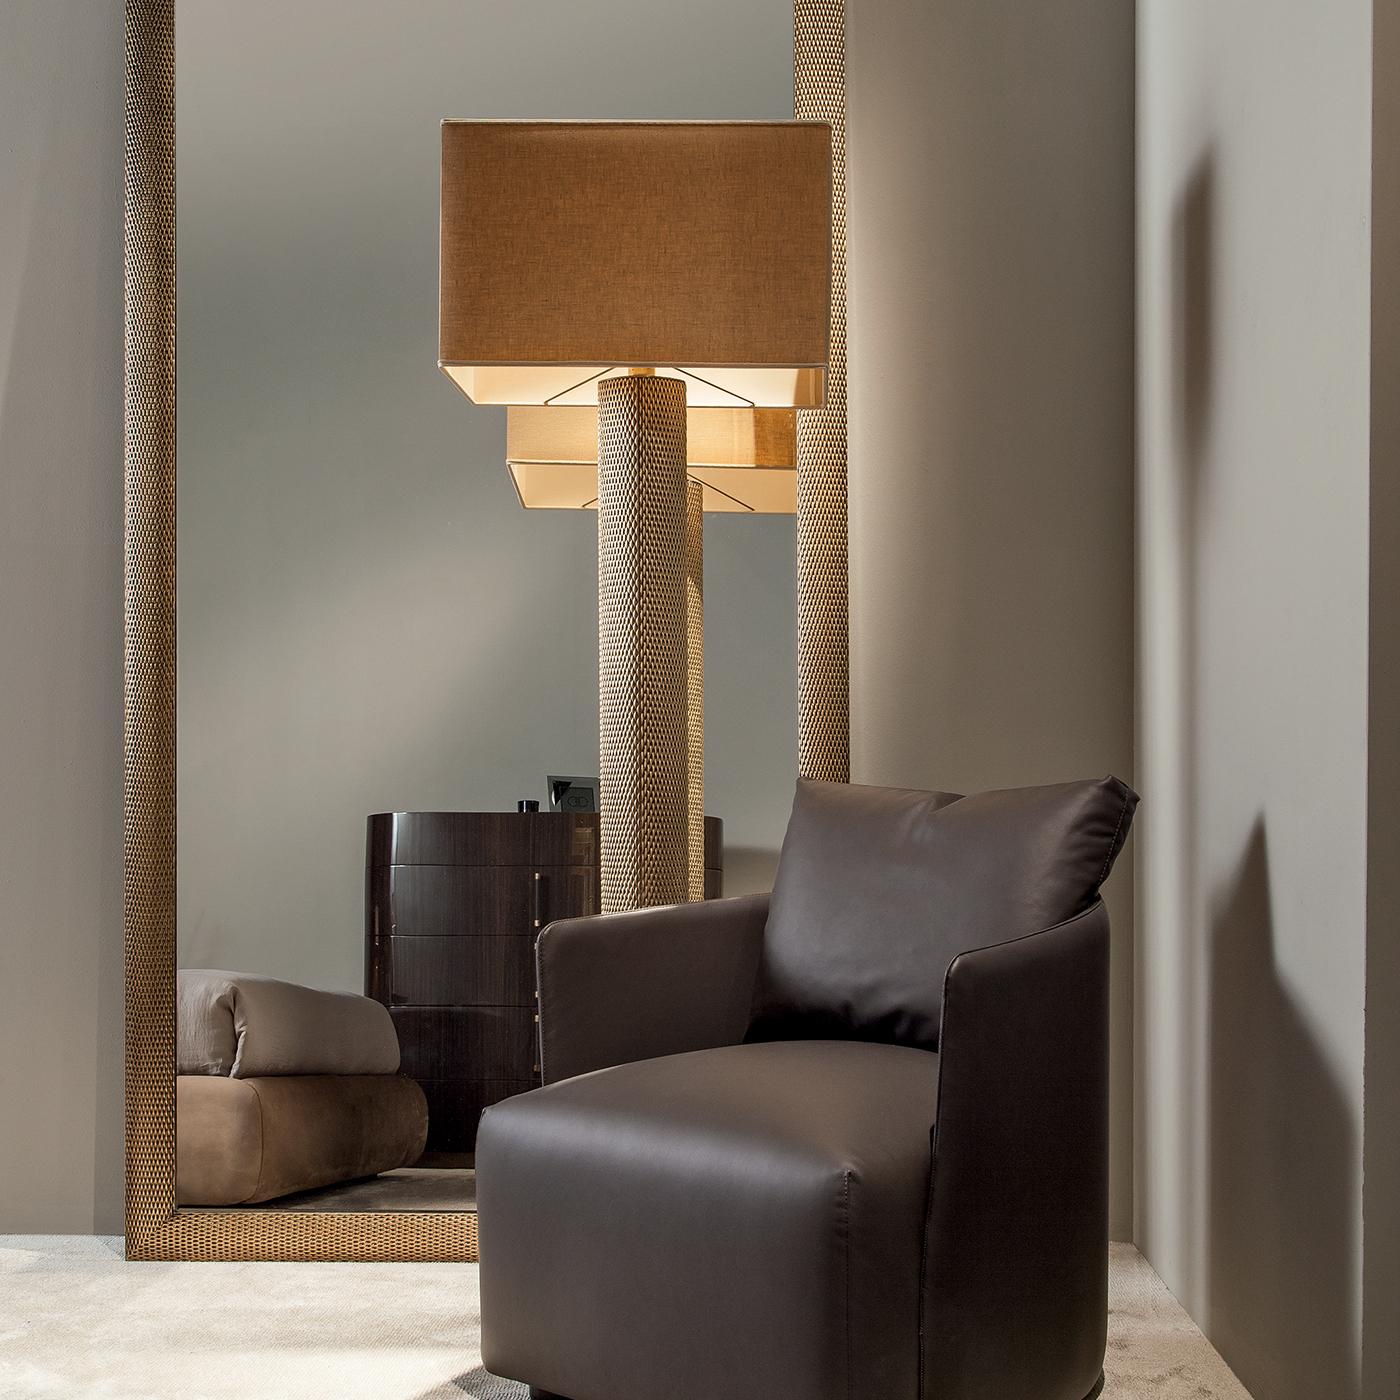 This distinctive floor lamp features a bold, imposing silhouette that will add personality and an intimate glow in any living room corner, thanks to its soft, earthy hues. The structure is made entirely of solid wood with an exquisitely executed